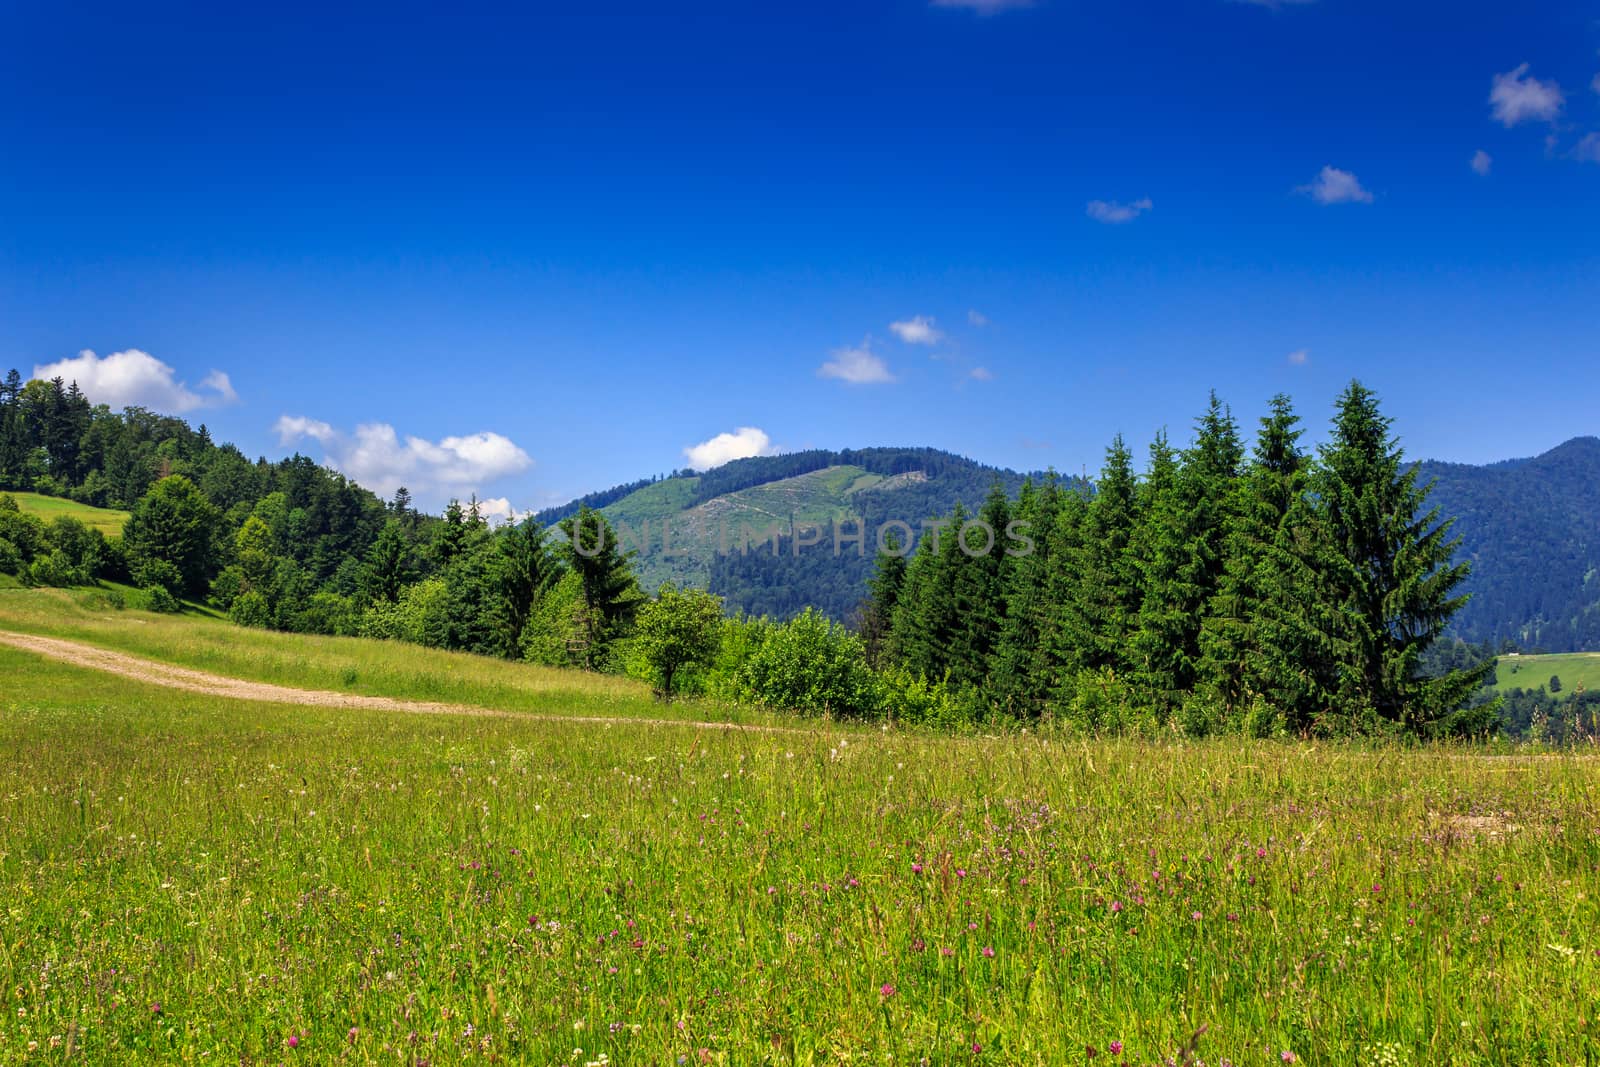 large meadow with pine trees on the hill in front of a mountain